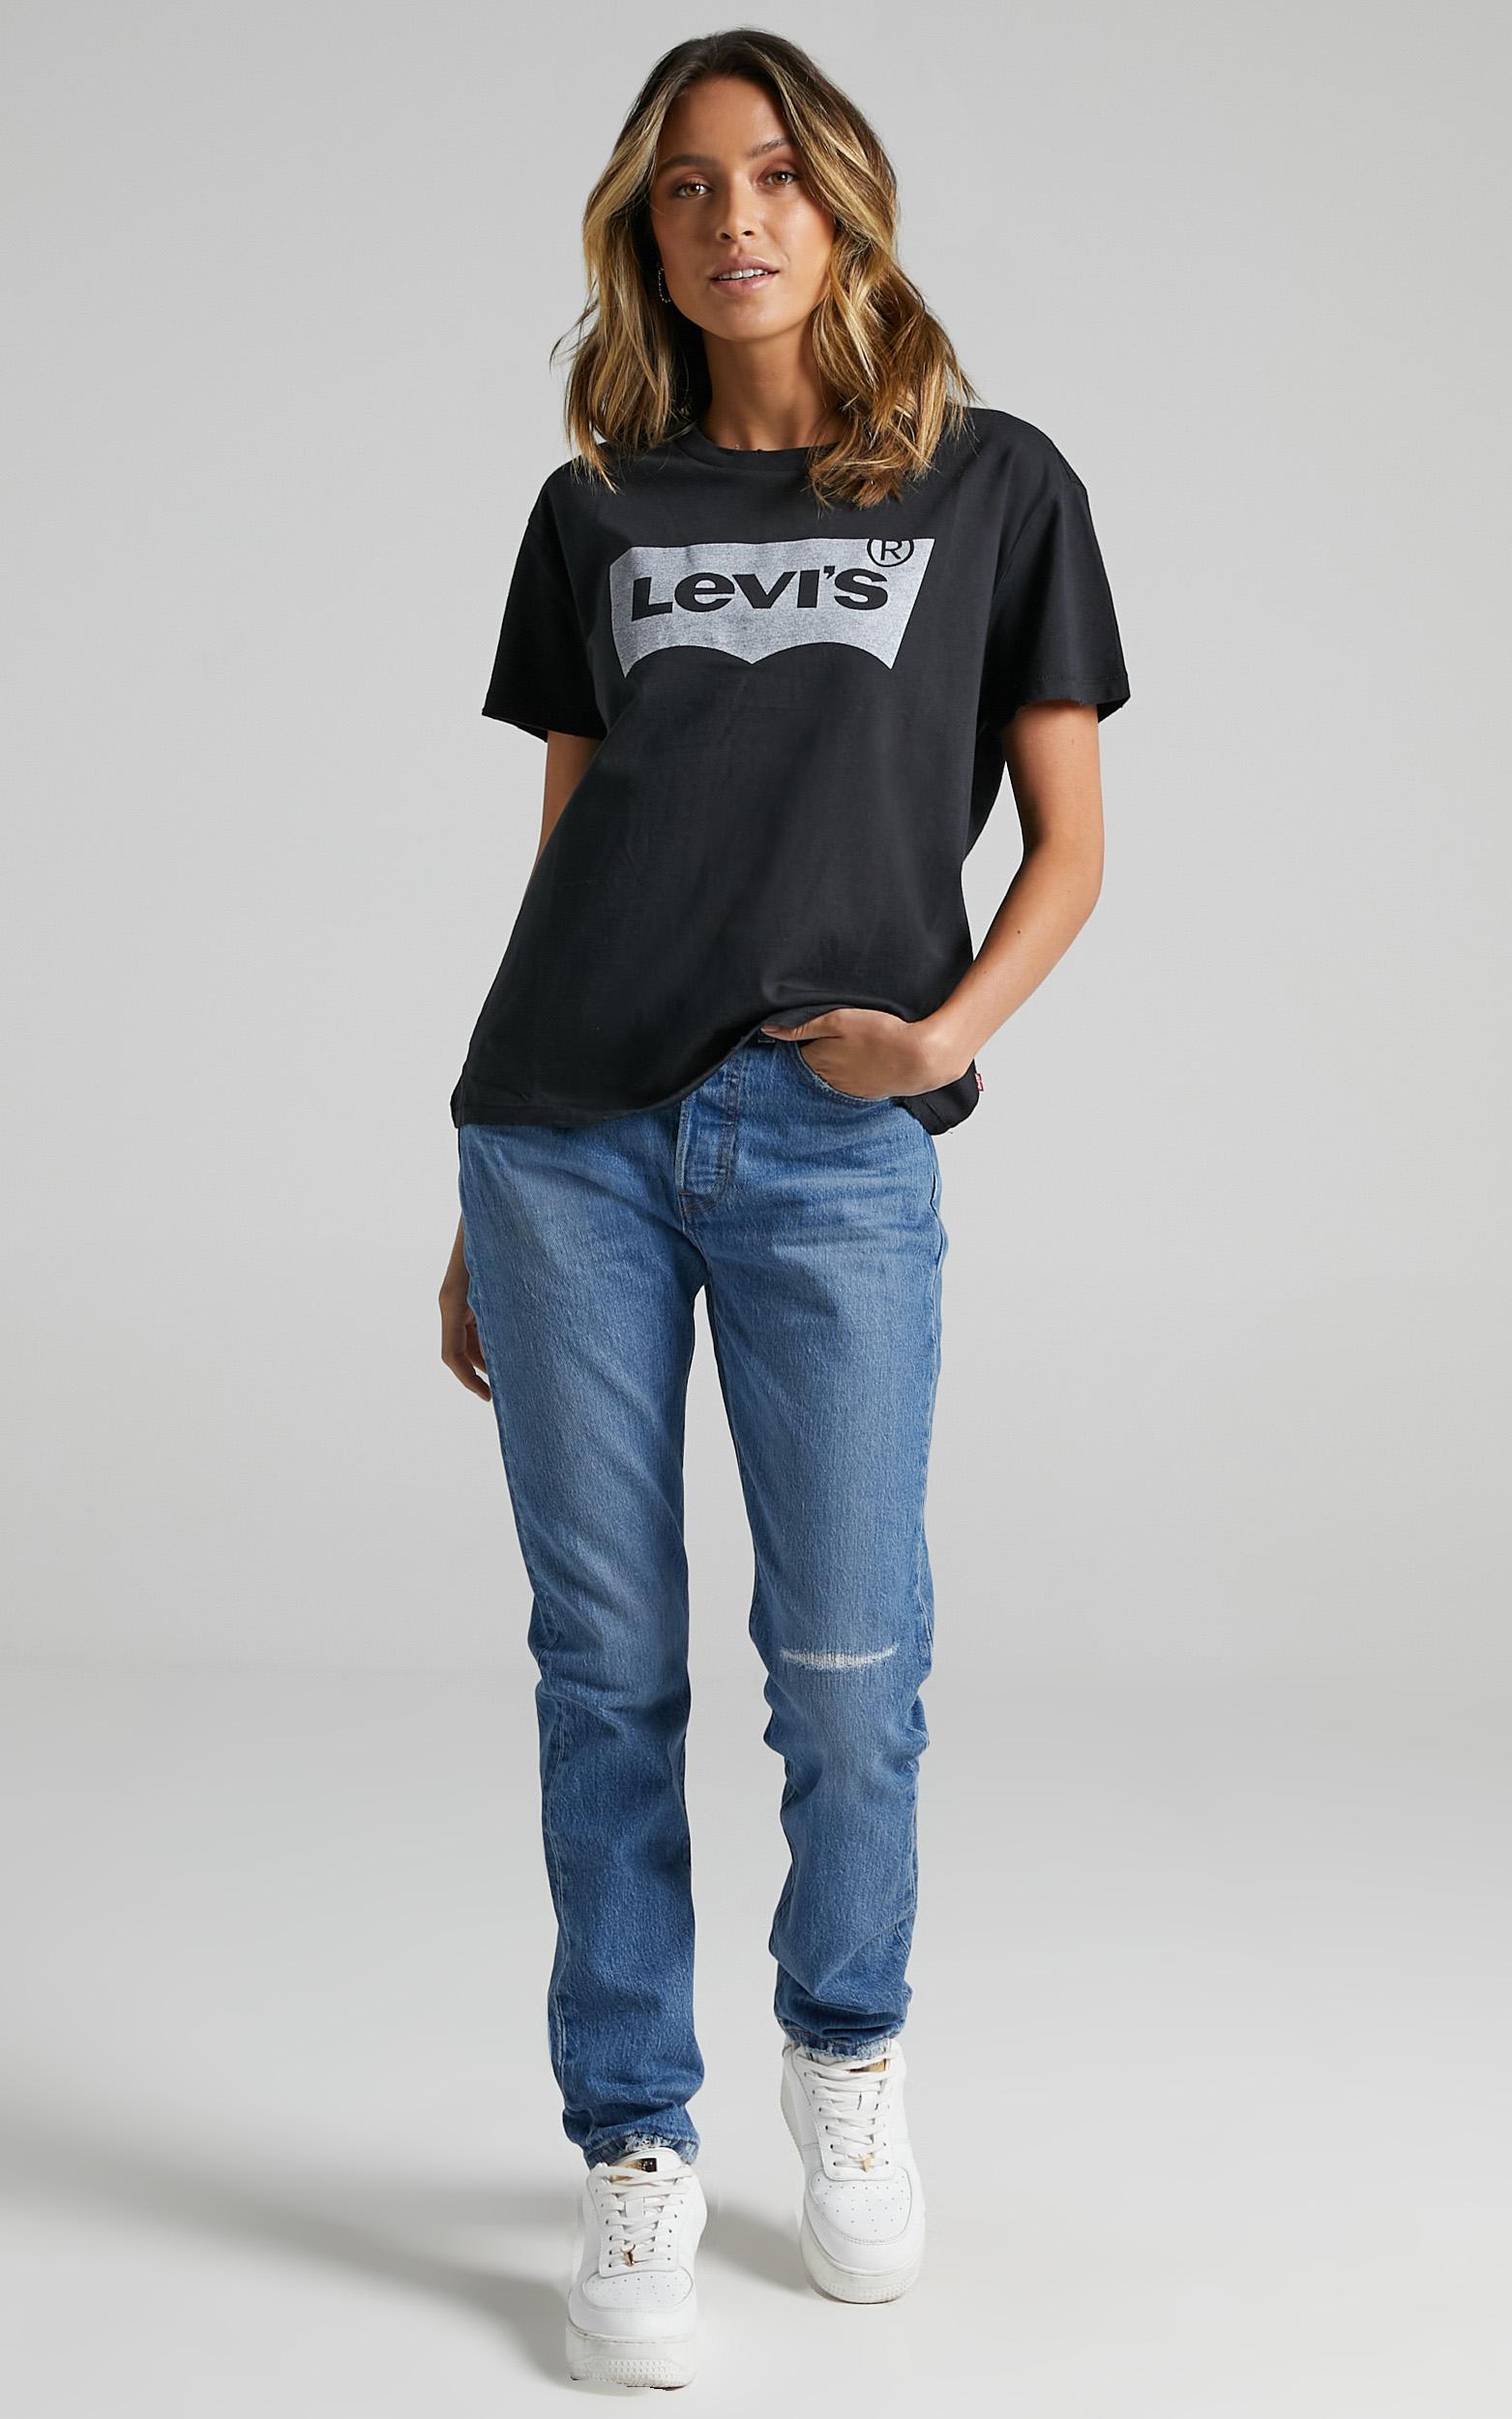 Levi's - Vintage Authentic Batwing Tee in Caviar - XS, BLK1, hi-res image number null